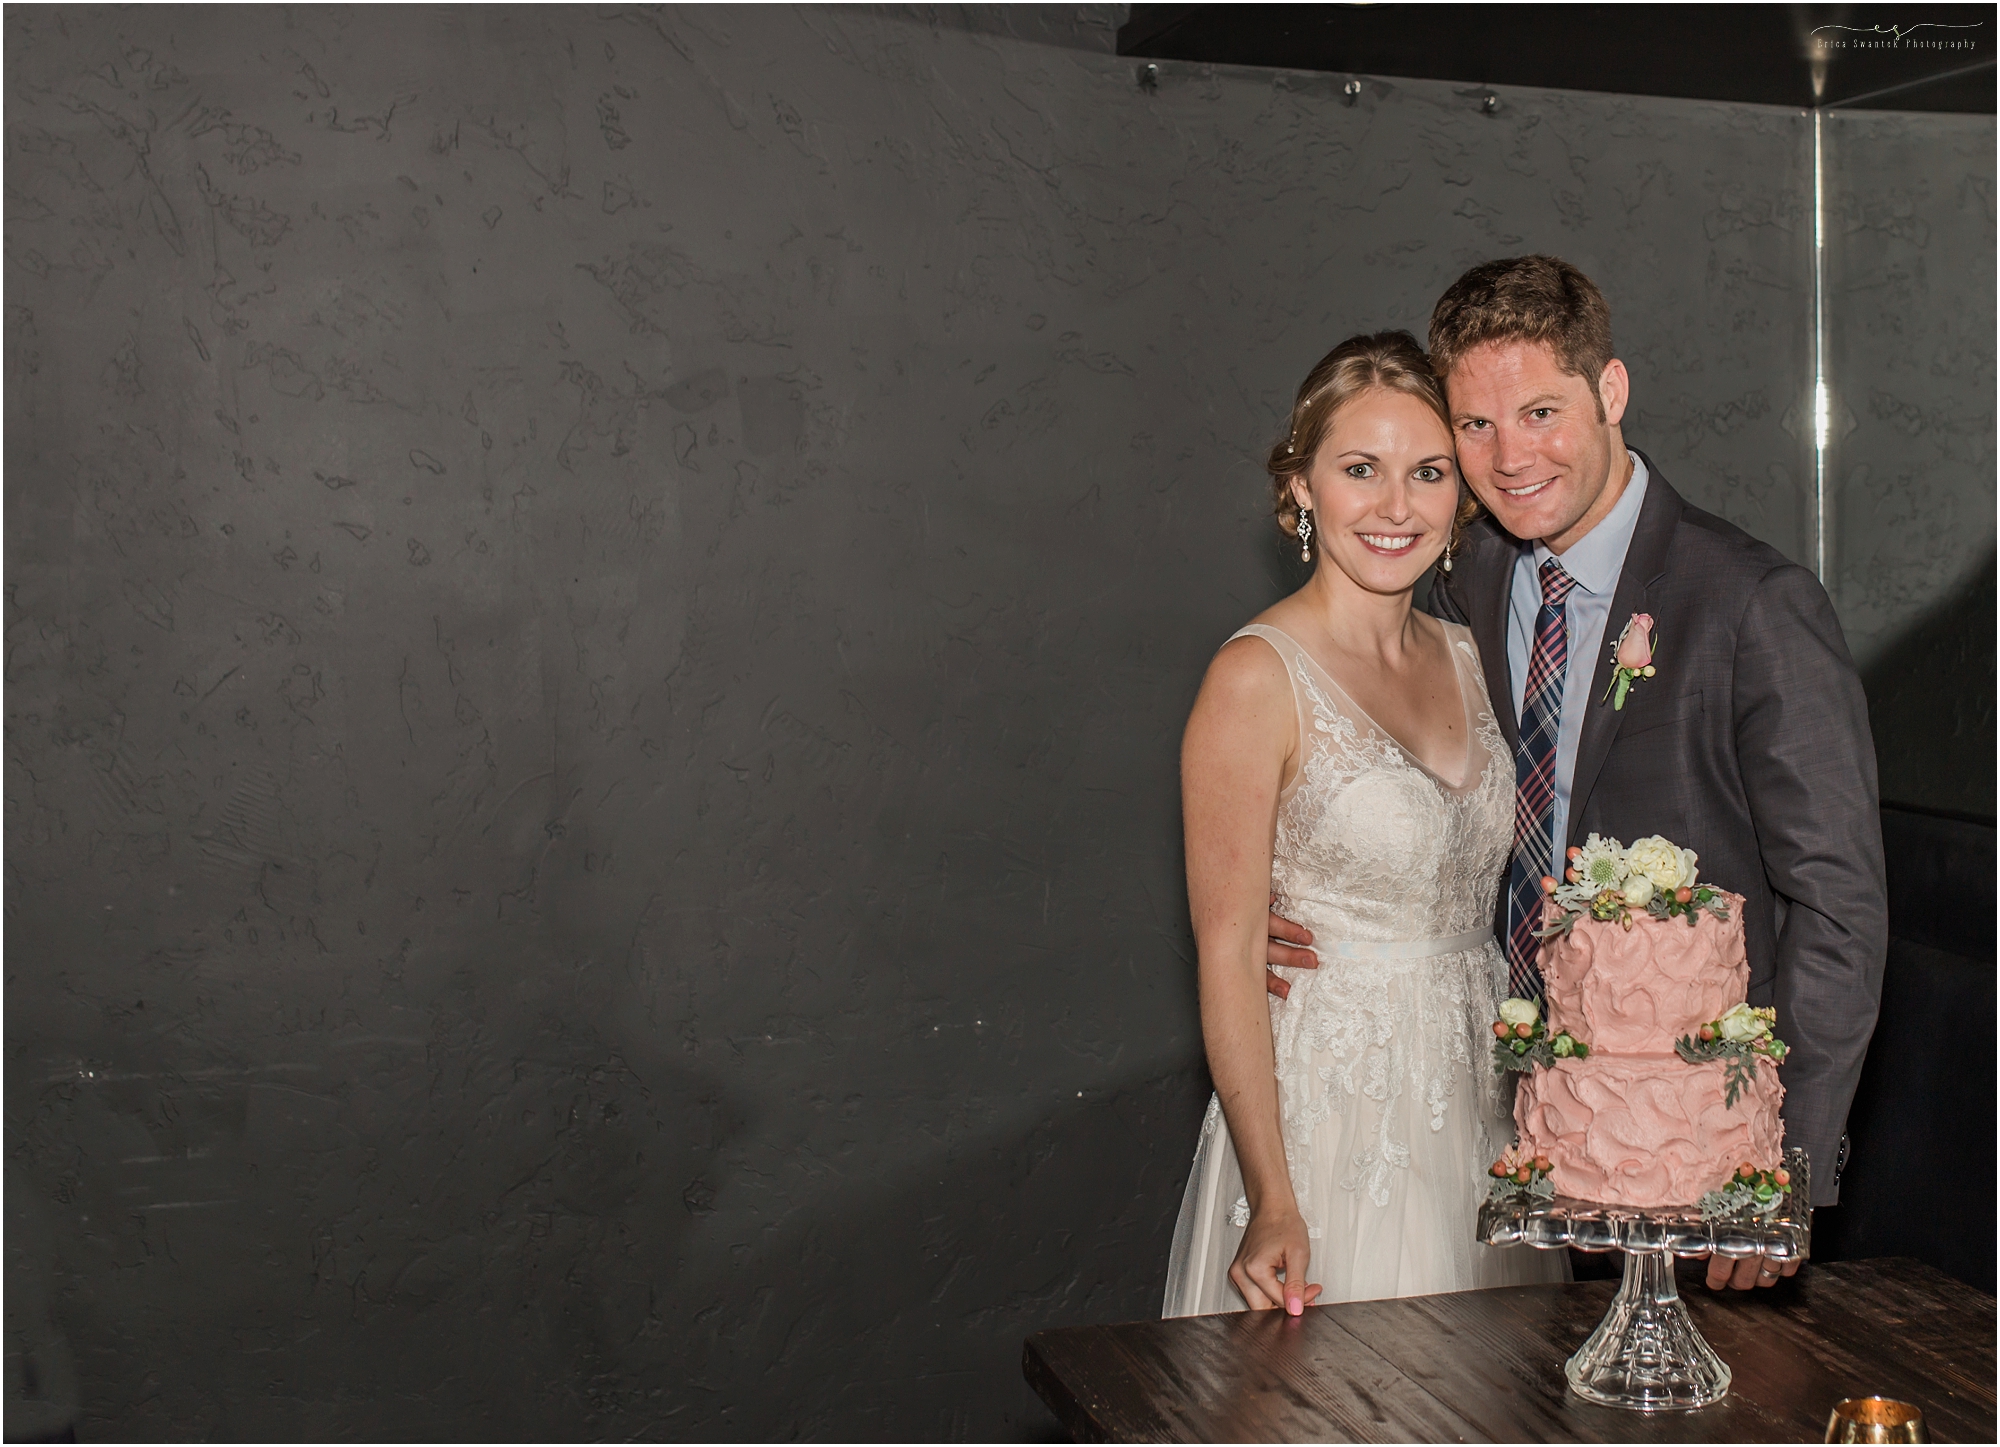 A beautiful bride and groom with their cake created by Faith and Flour in Redmond, OR.